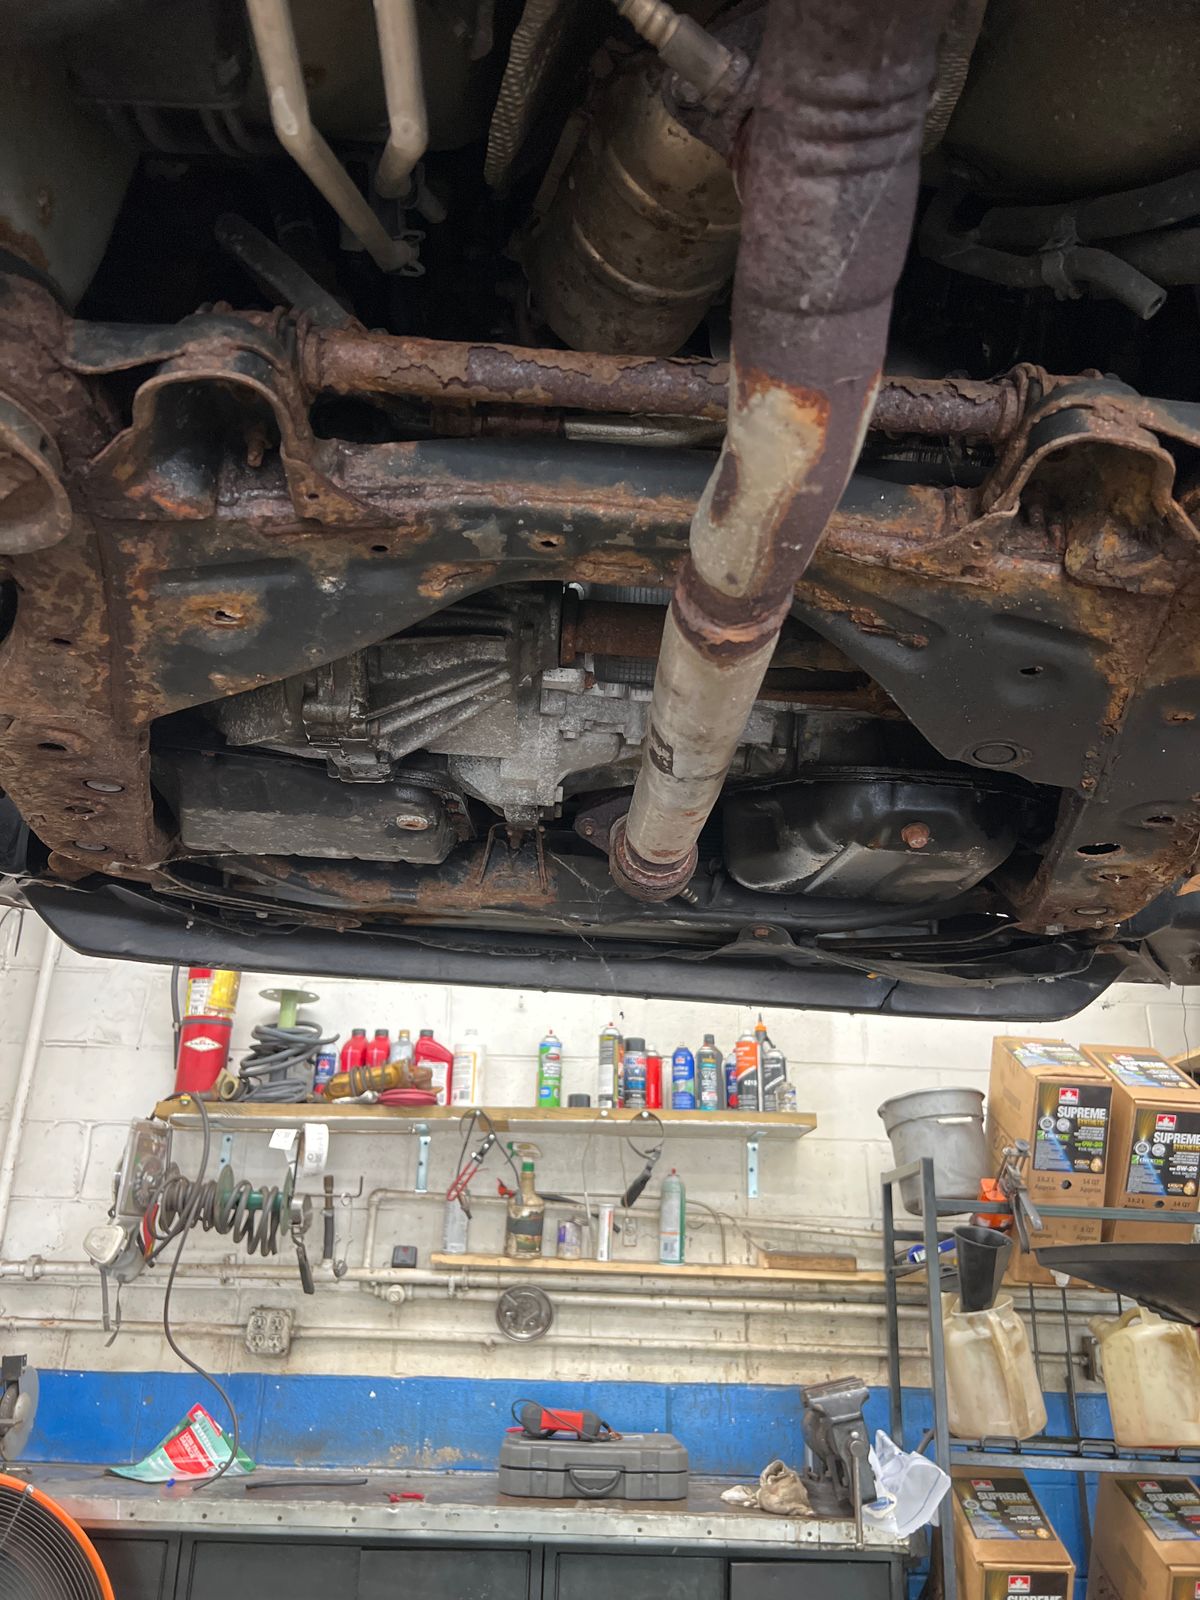 Why is Rust Protection Good for my car?